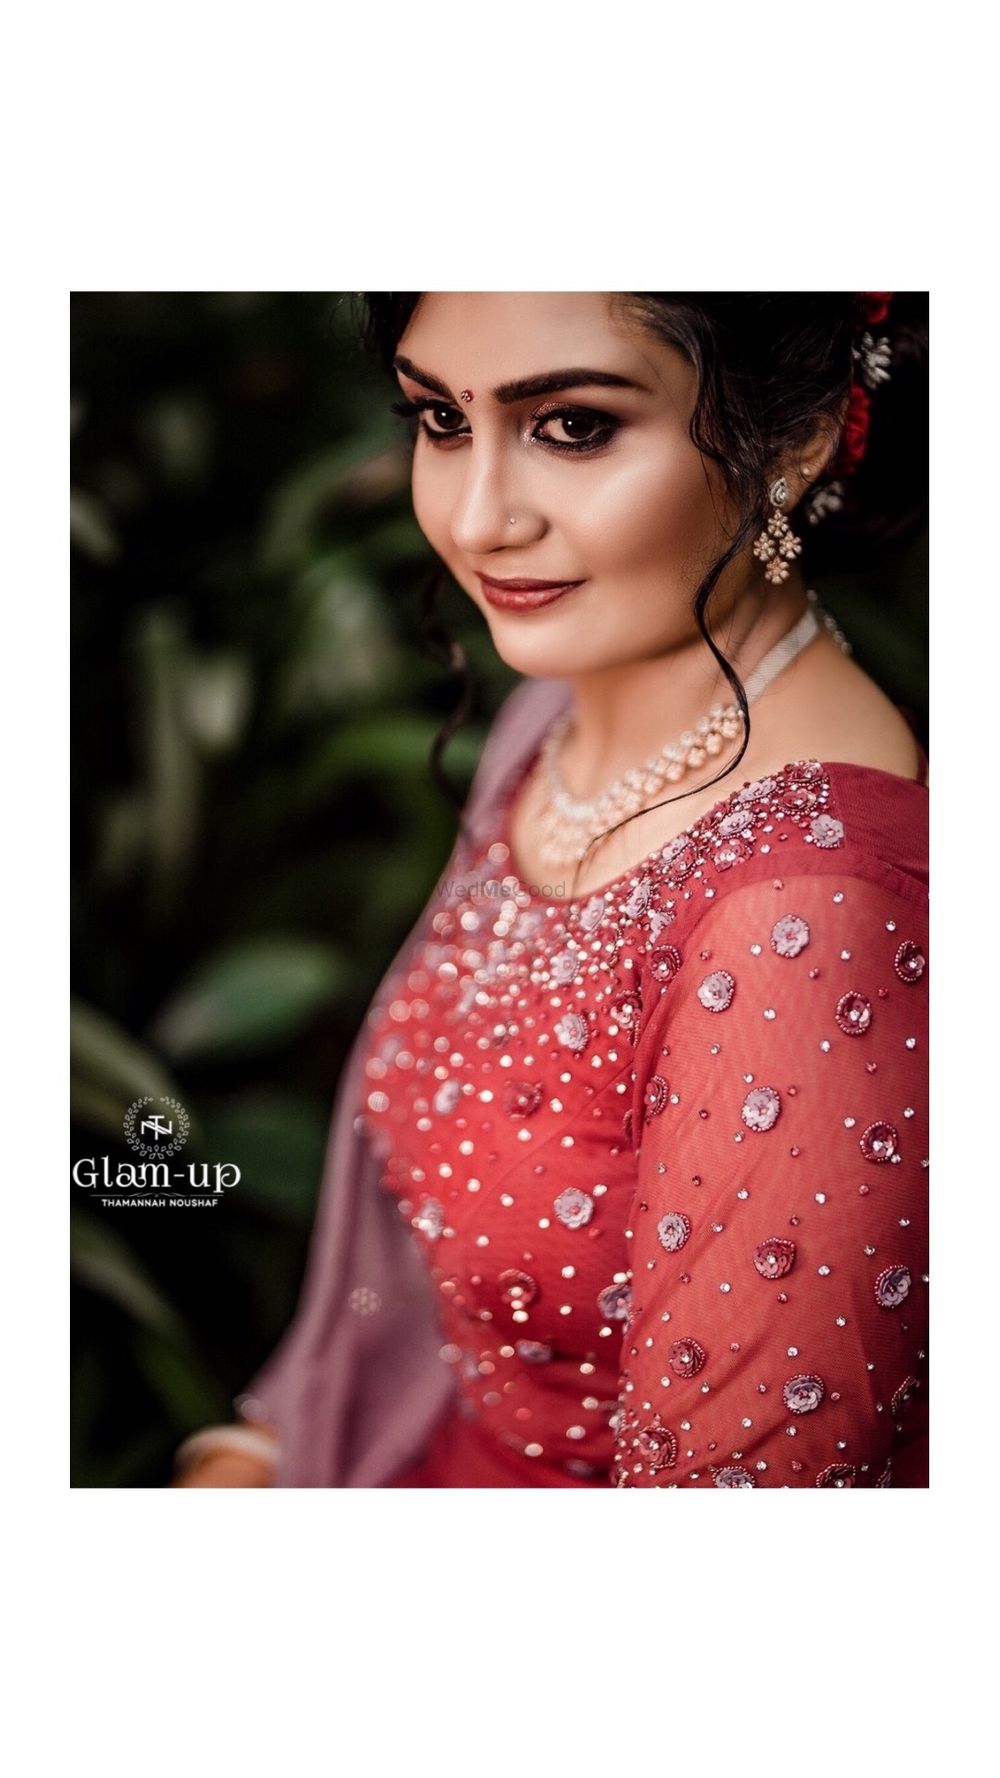 Photo From Bride : Shyamal - By Thamannah Noushaf Makeup Artist 